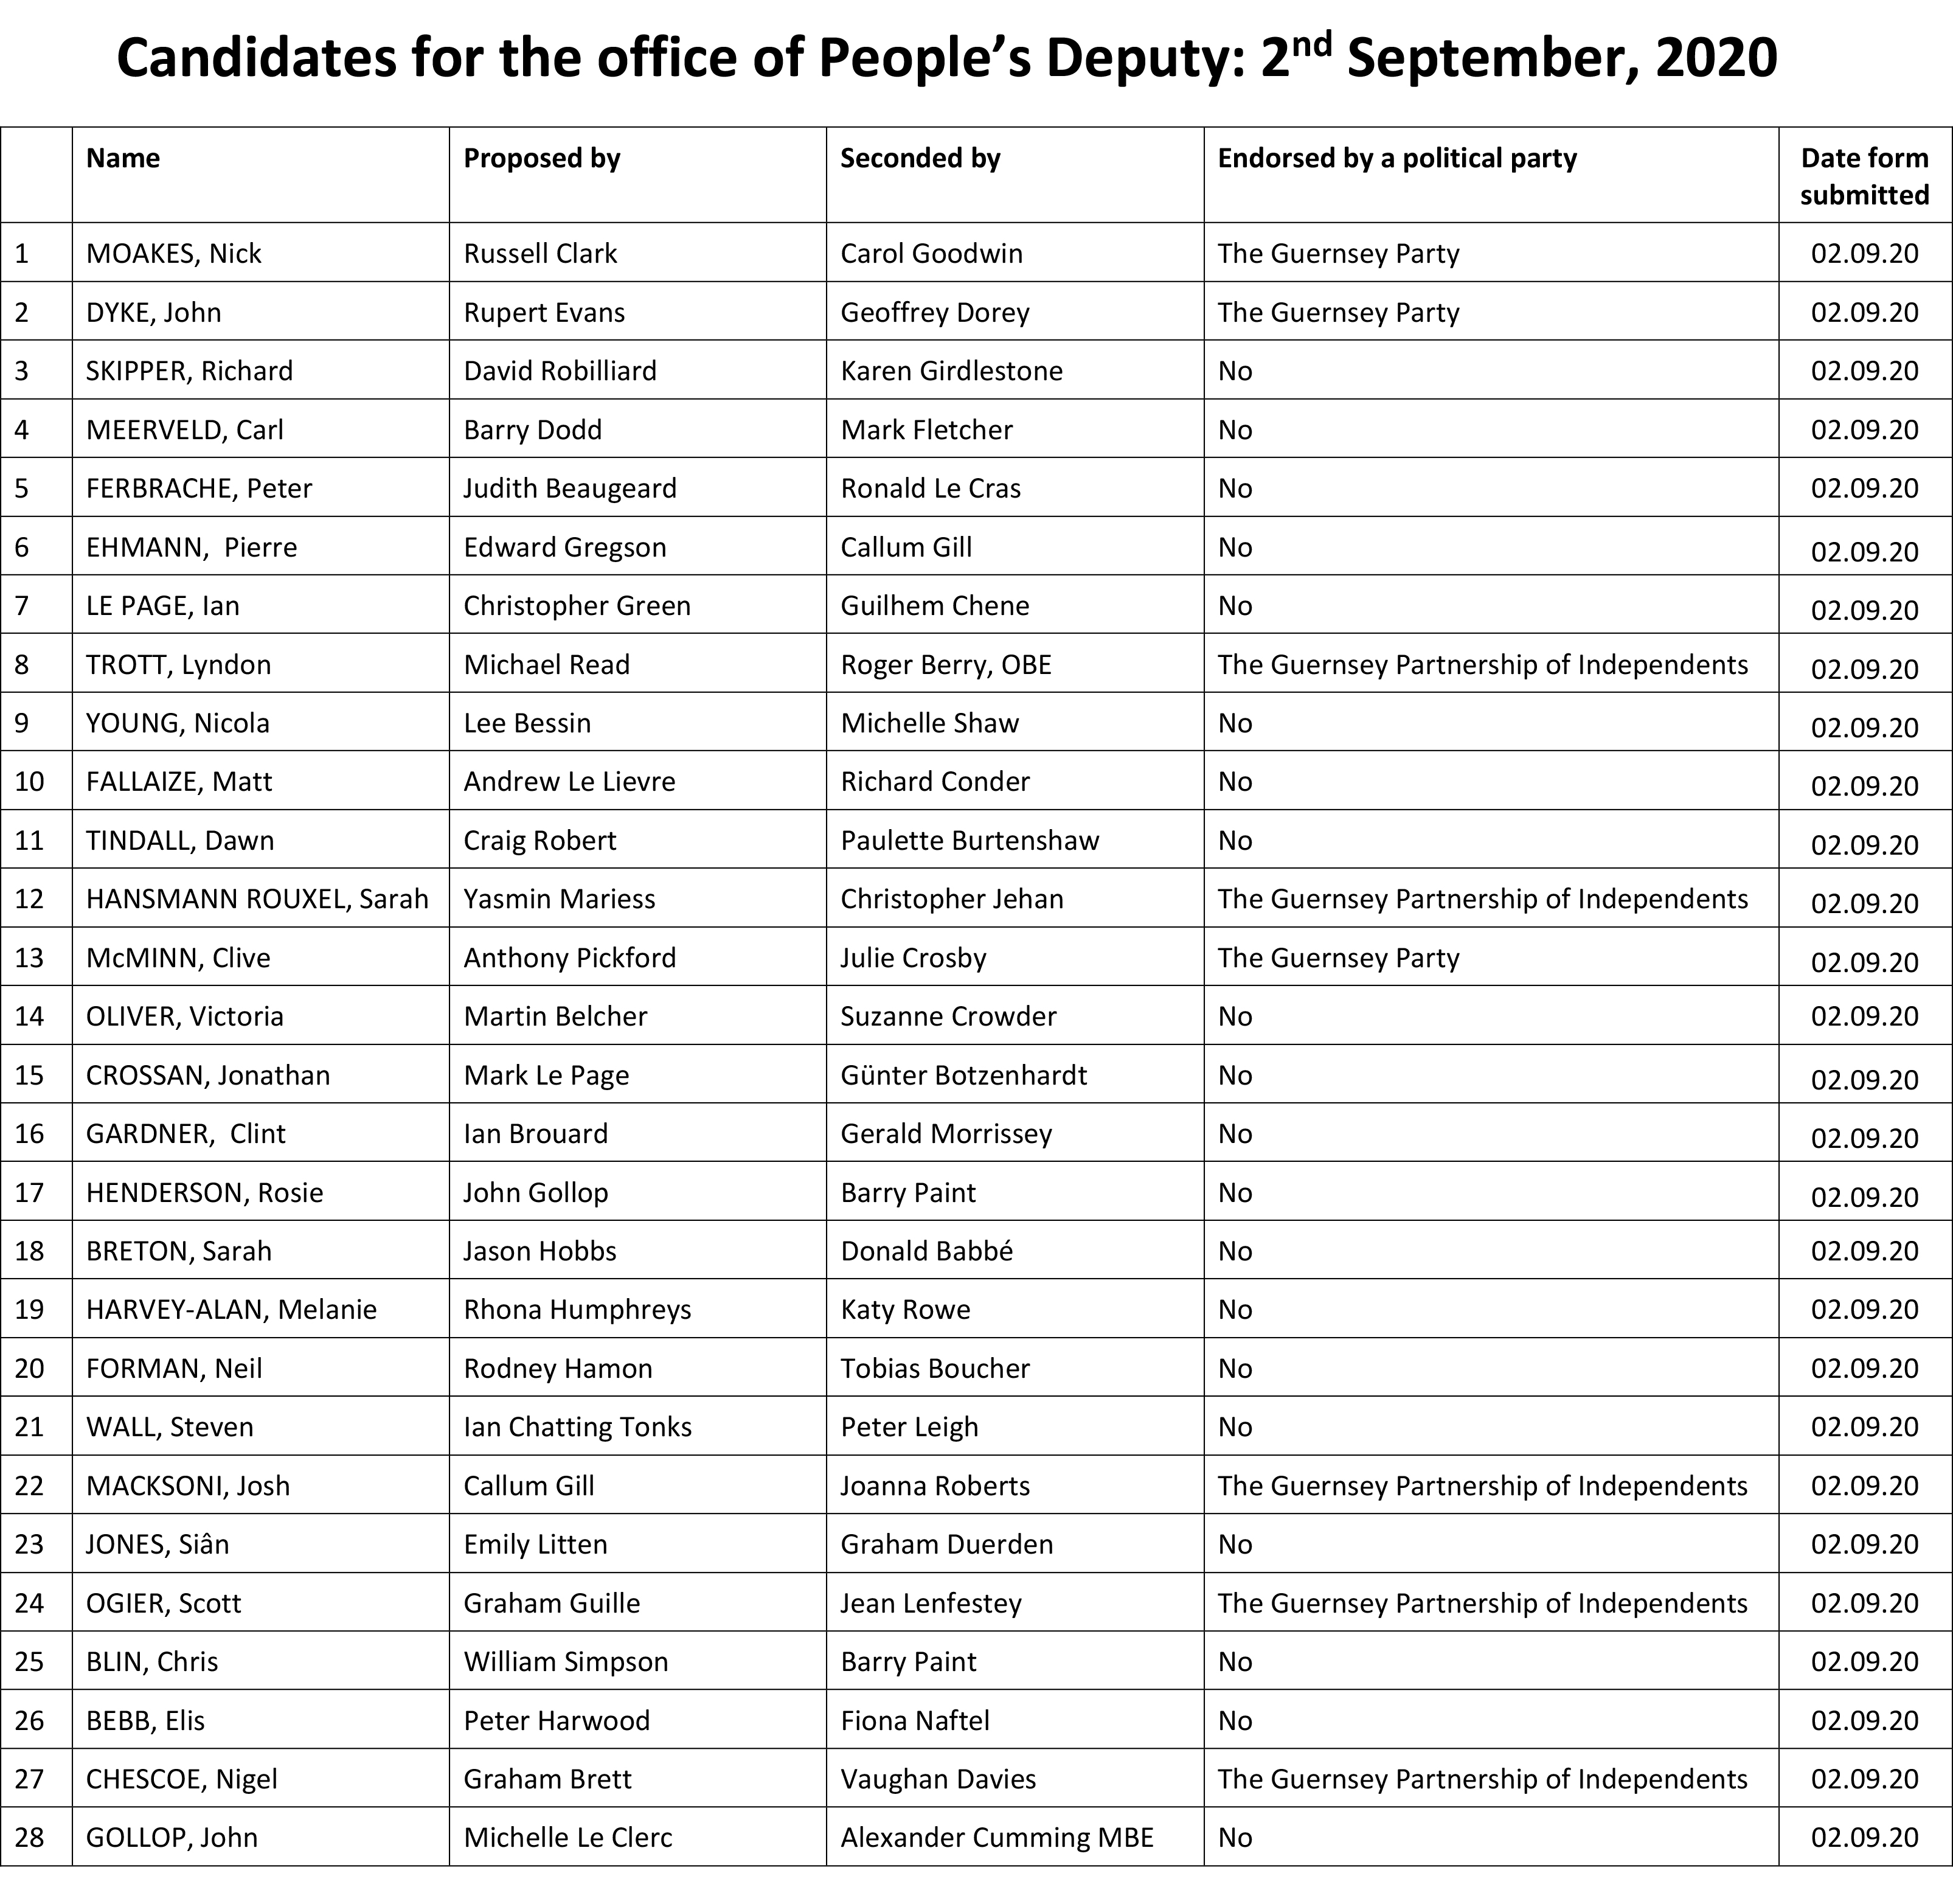 Candidates-for-the-office-of-Peoples-Deputy---List-for-publication---2-Sept.jpg